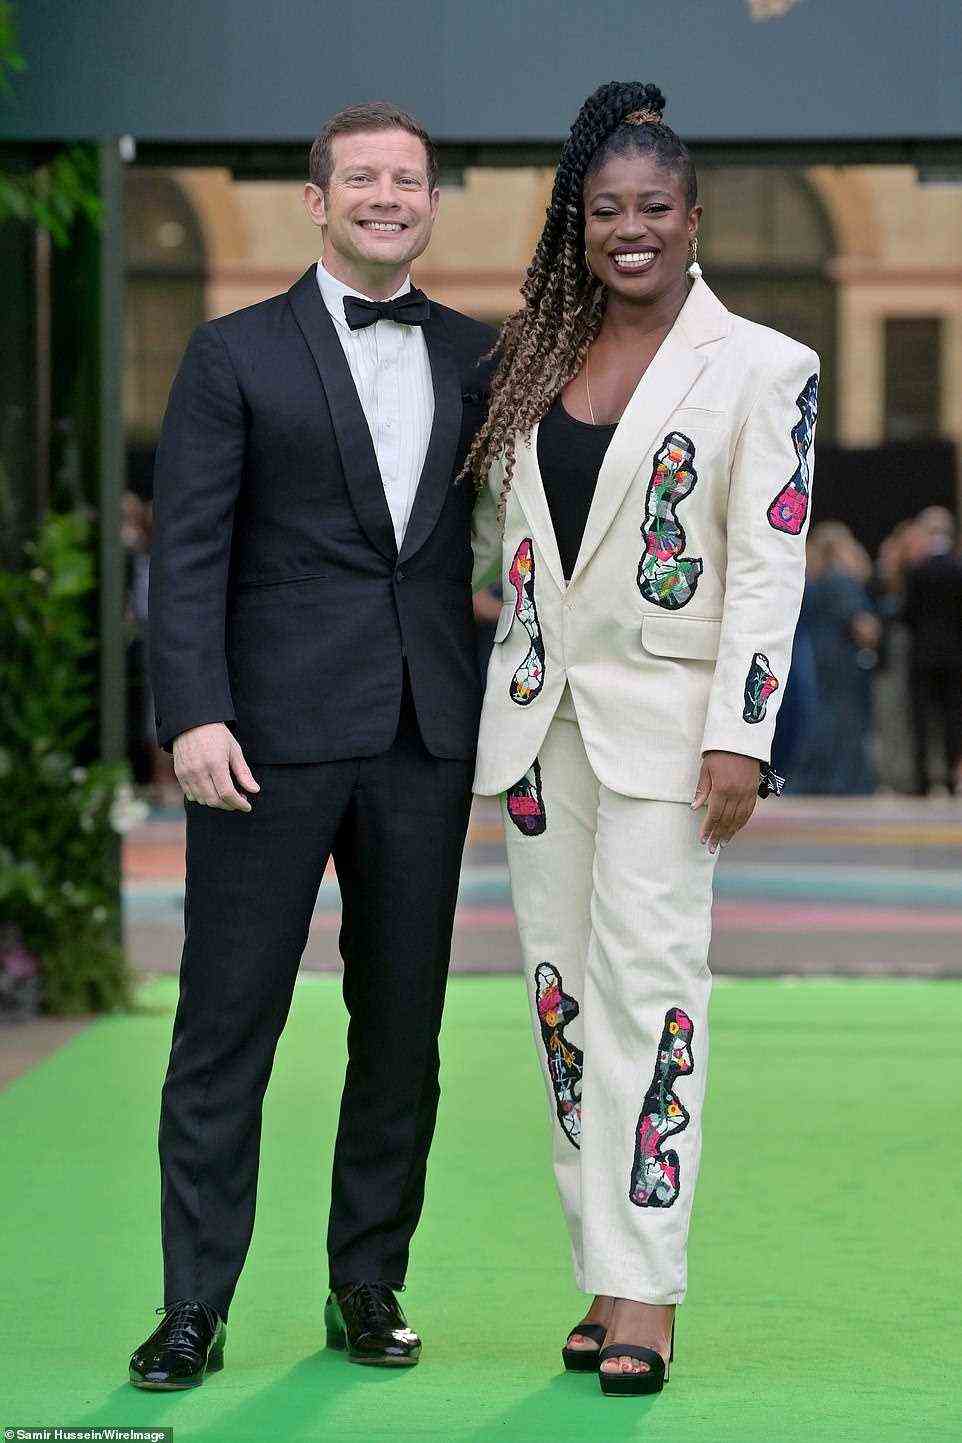 TV royalty: Dermot O'Leary was joined by Clara Amfo on the carpet. Dermot sported a black tuexedo while Clara wore a white suit with patchwork detail